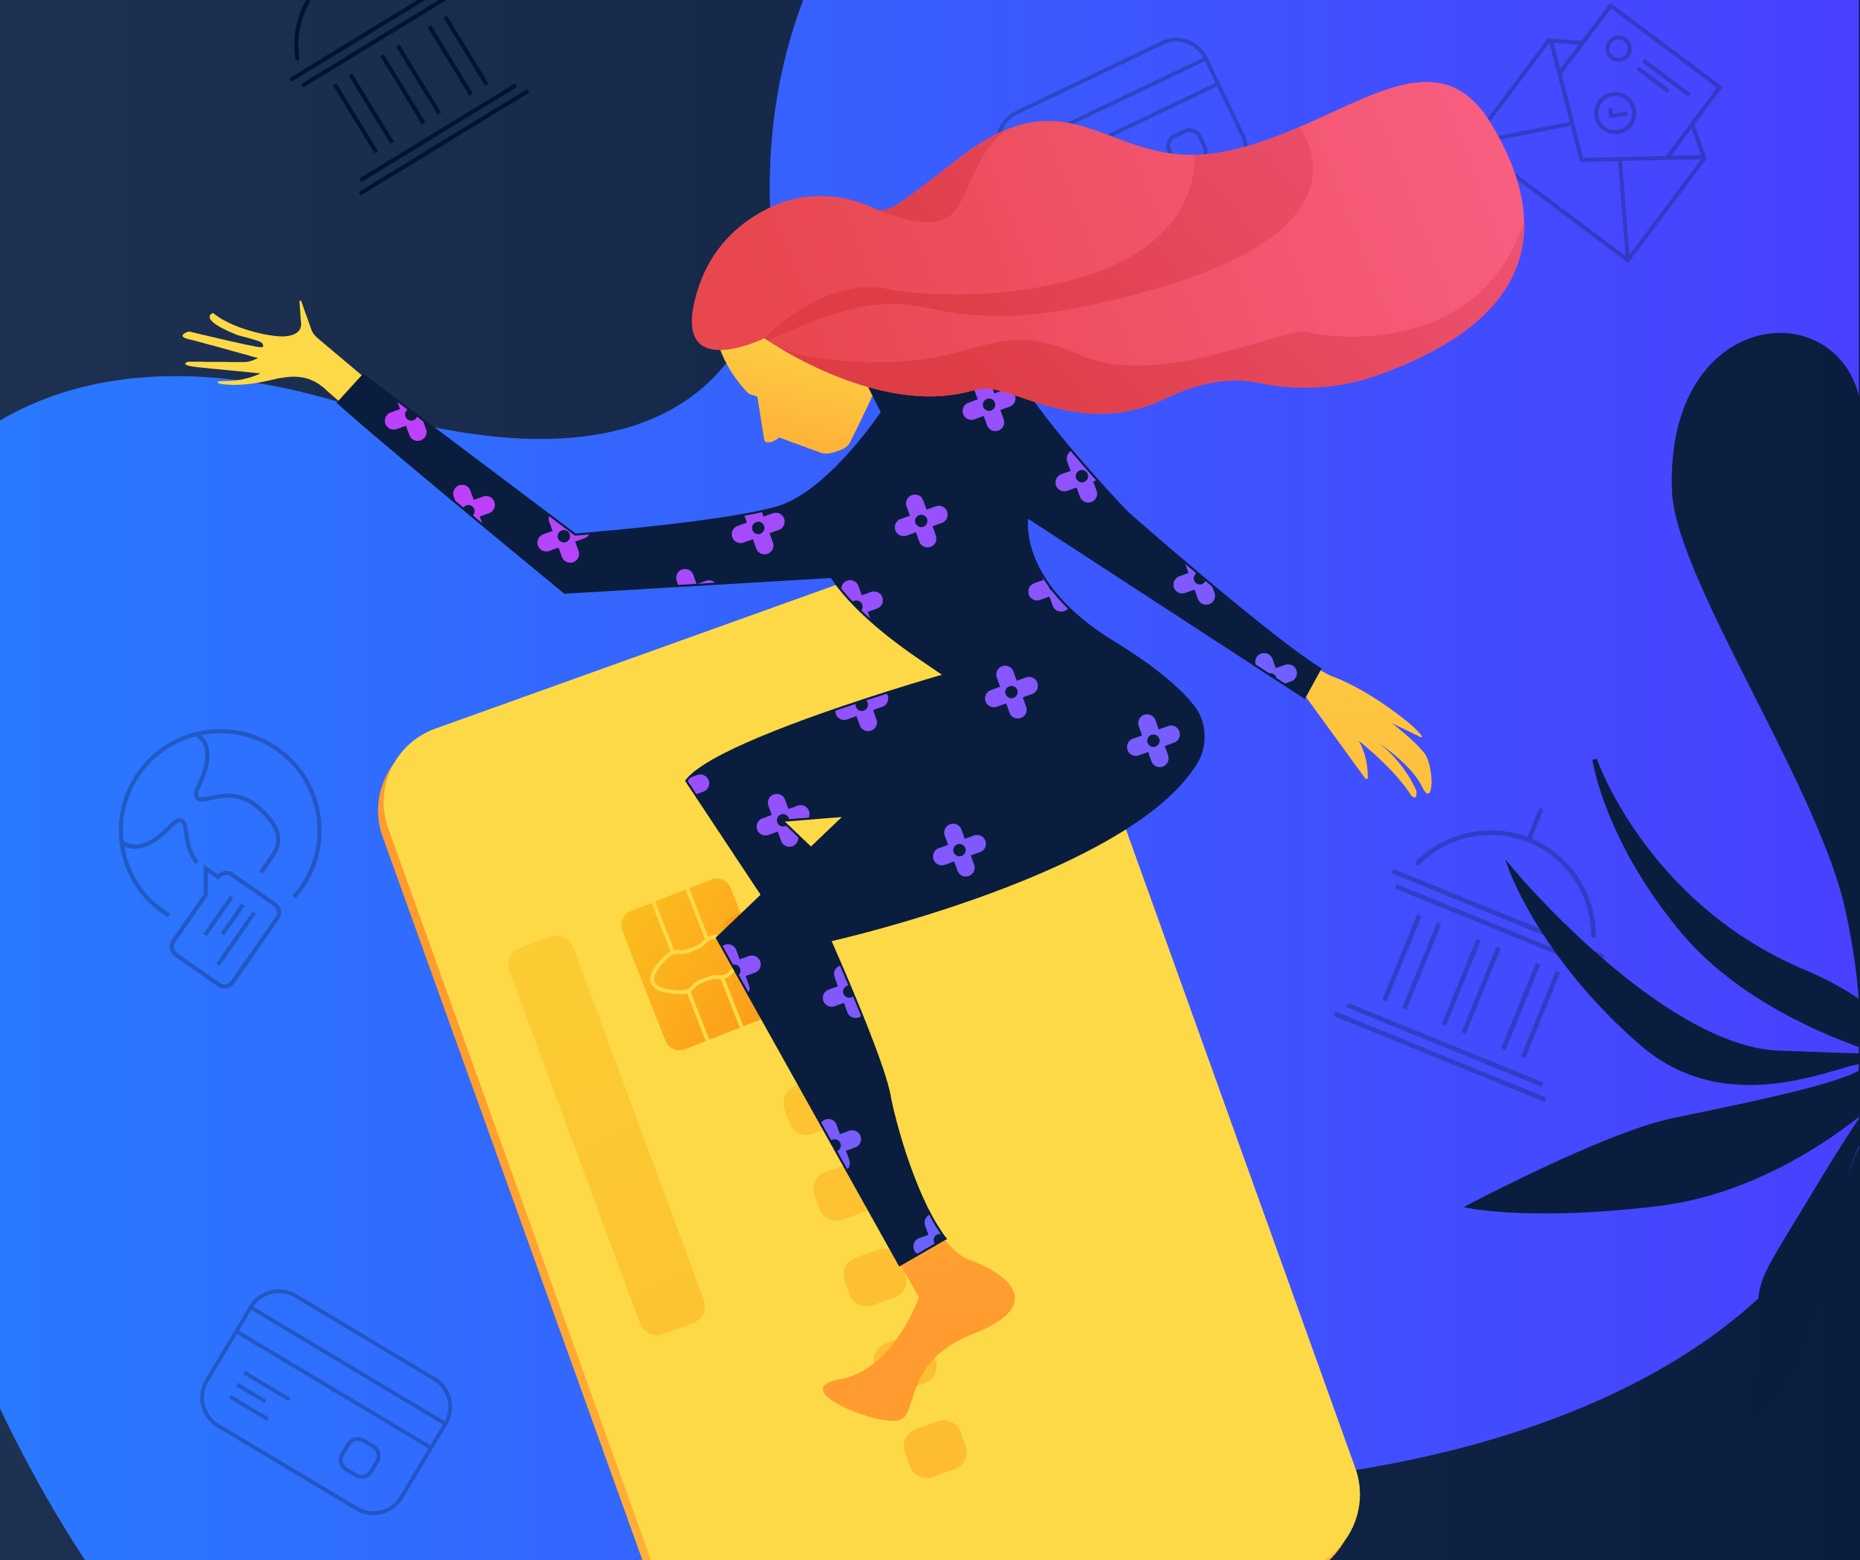 Illustration for mobile app UI with a woman surfing on credit card